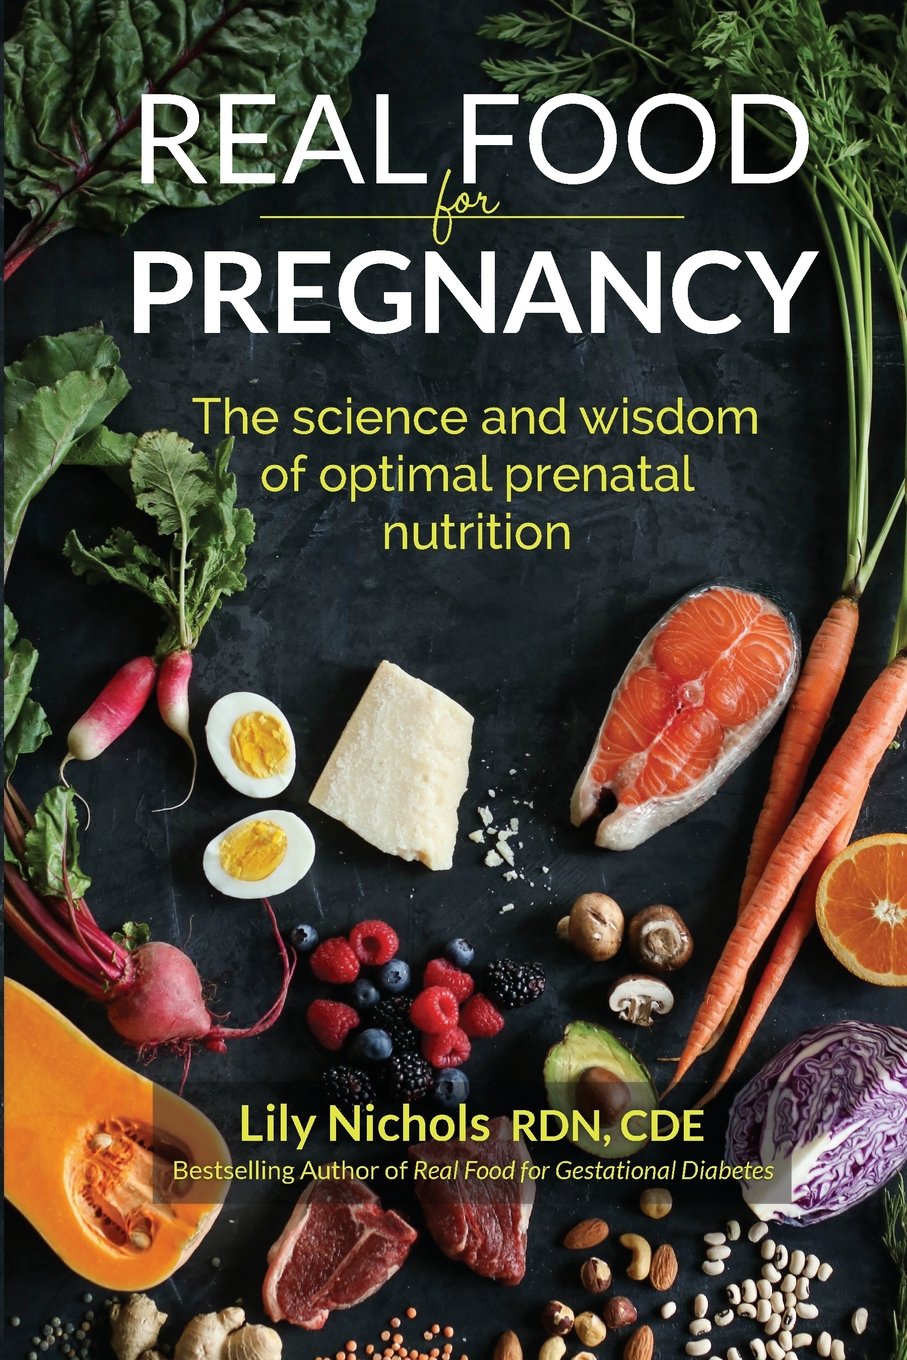 Learn how to nourish and move your body during pregnancy.